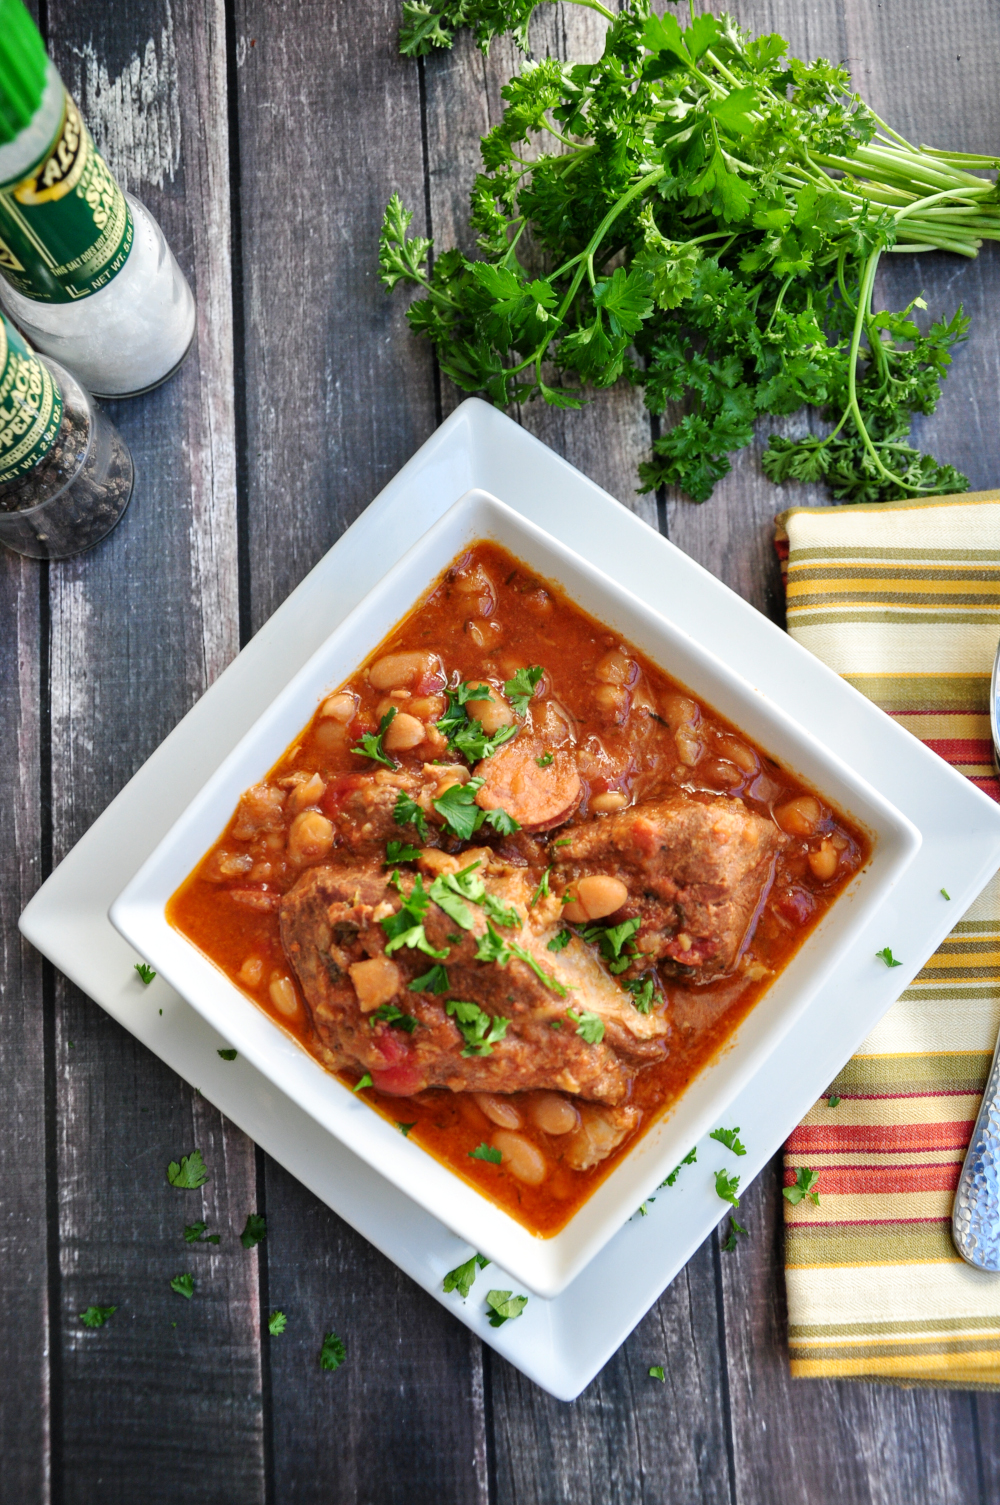 Slow Cooker Country-Style Pork and Beans Recipe with Sausage